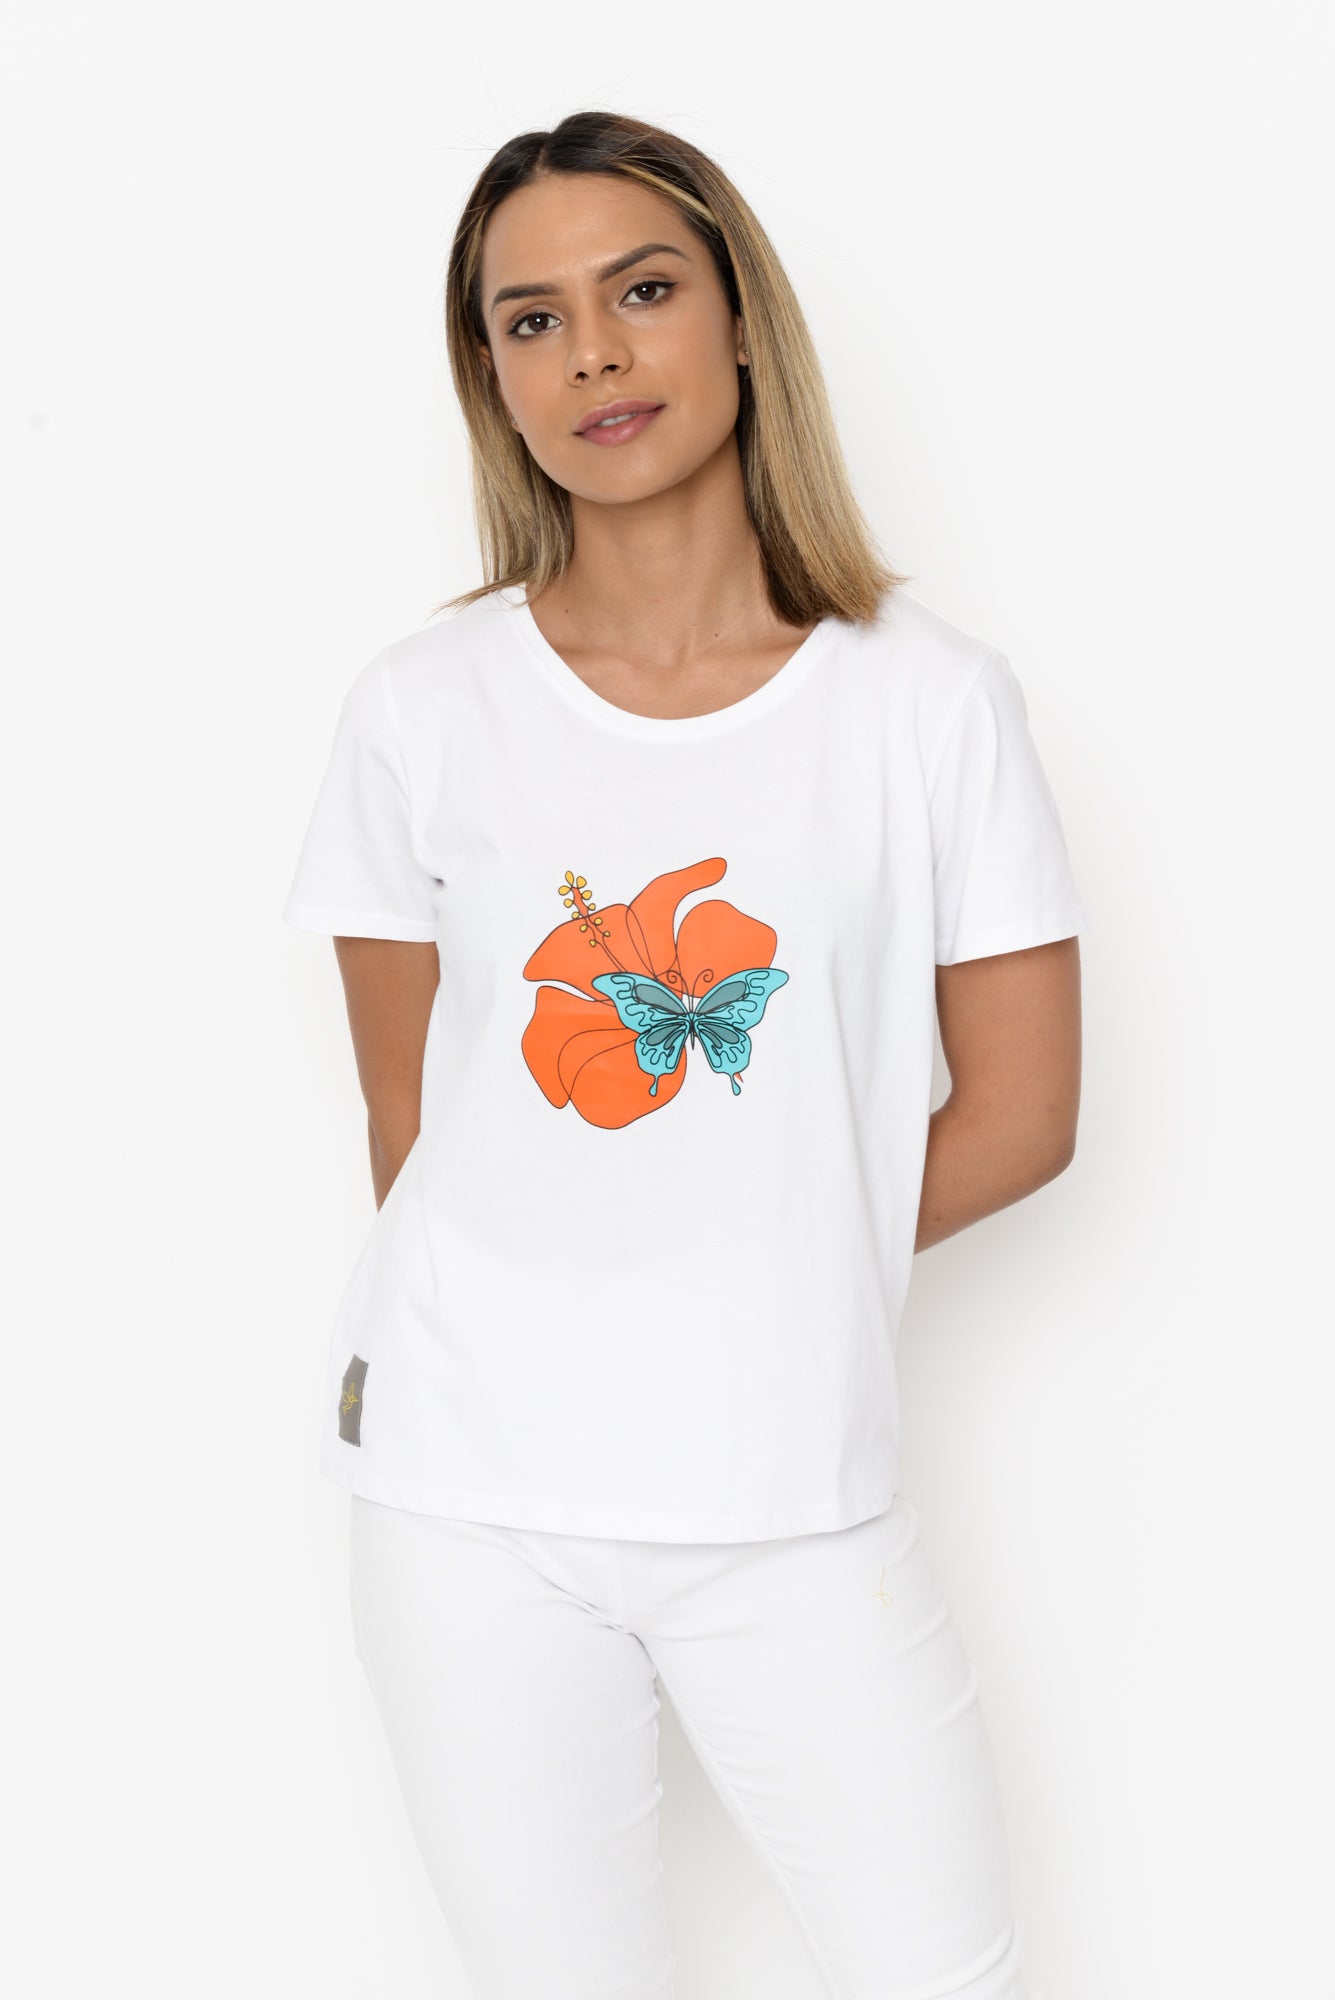 Women's Cube Tee - Blue Butterfly & Coral Hibiscus